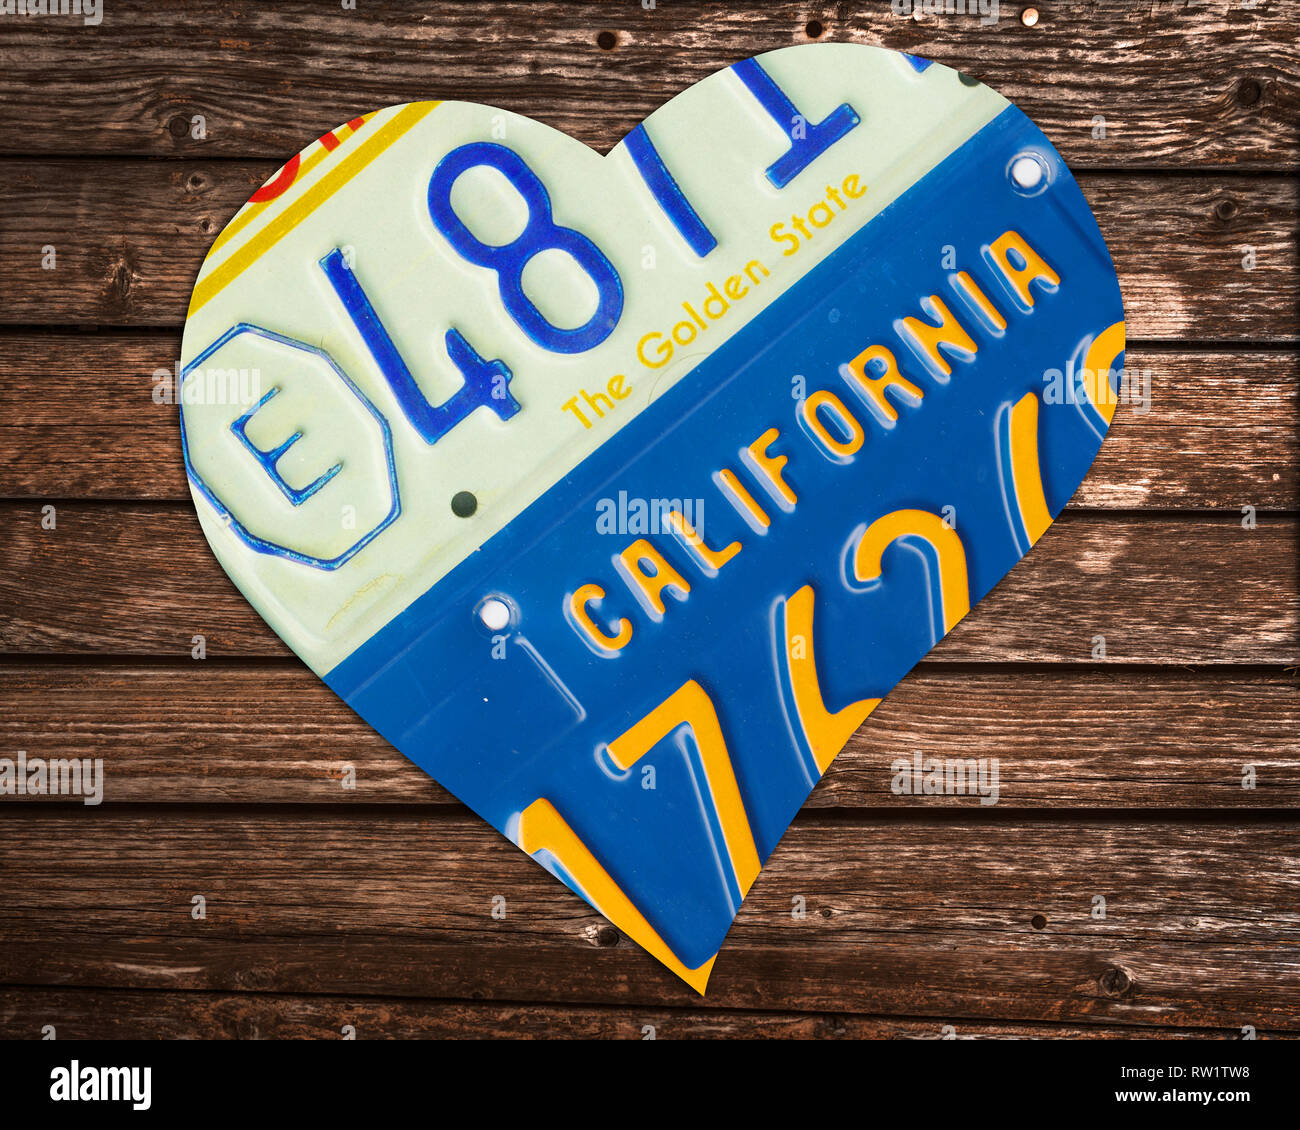 California state license plates in the shape of a heart on wood background Stock Photo